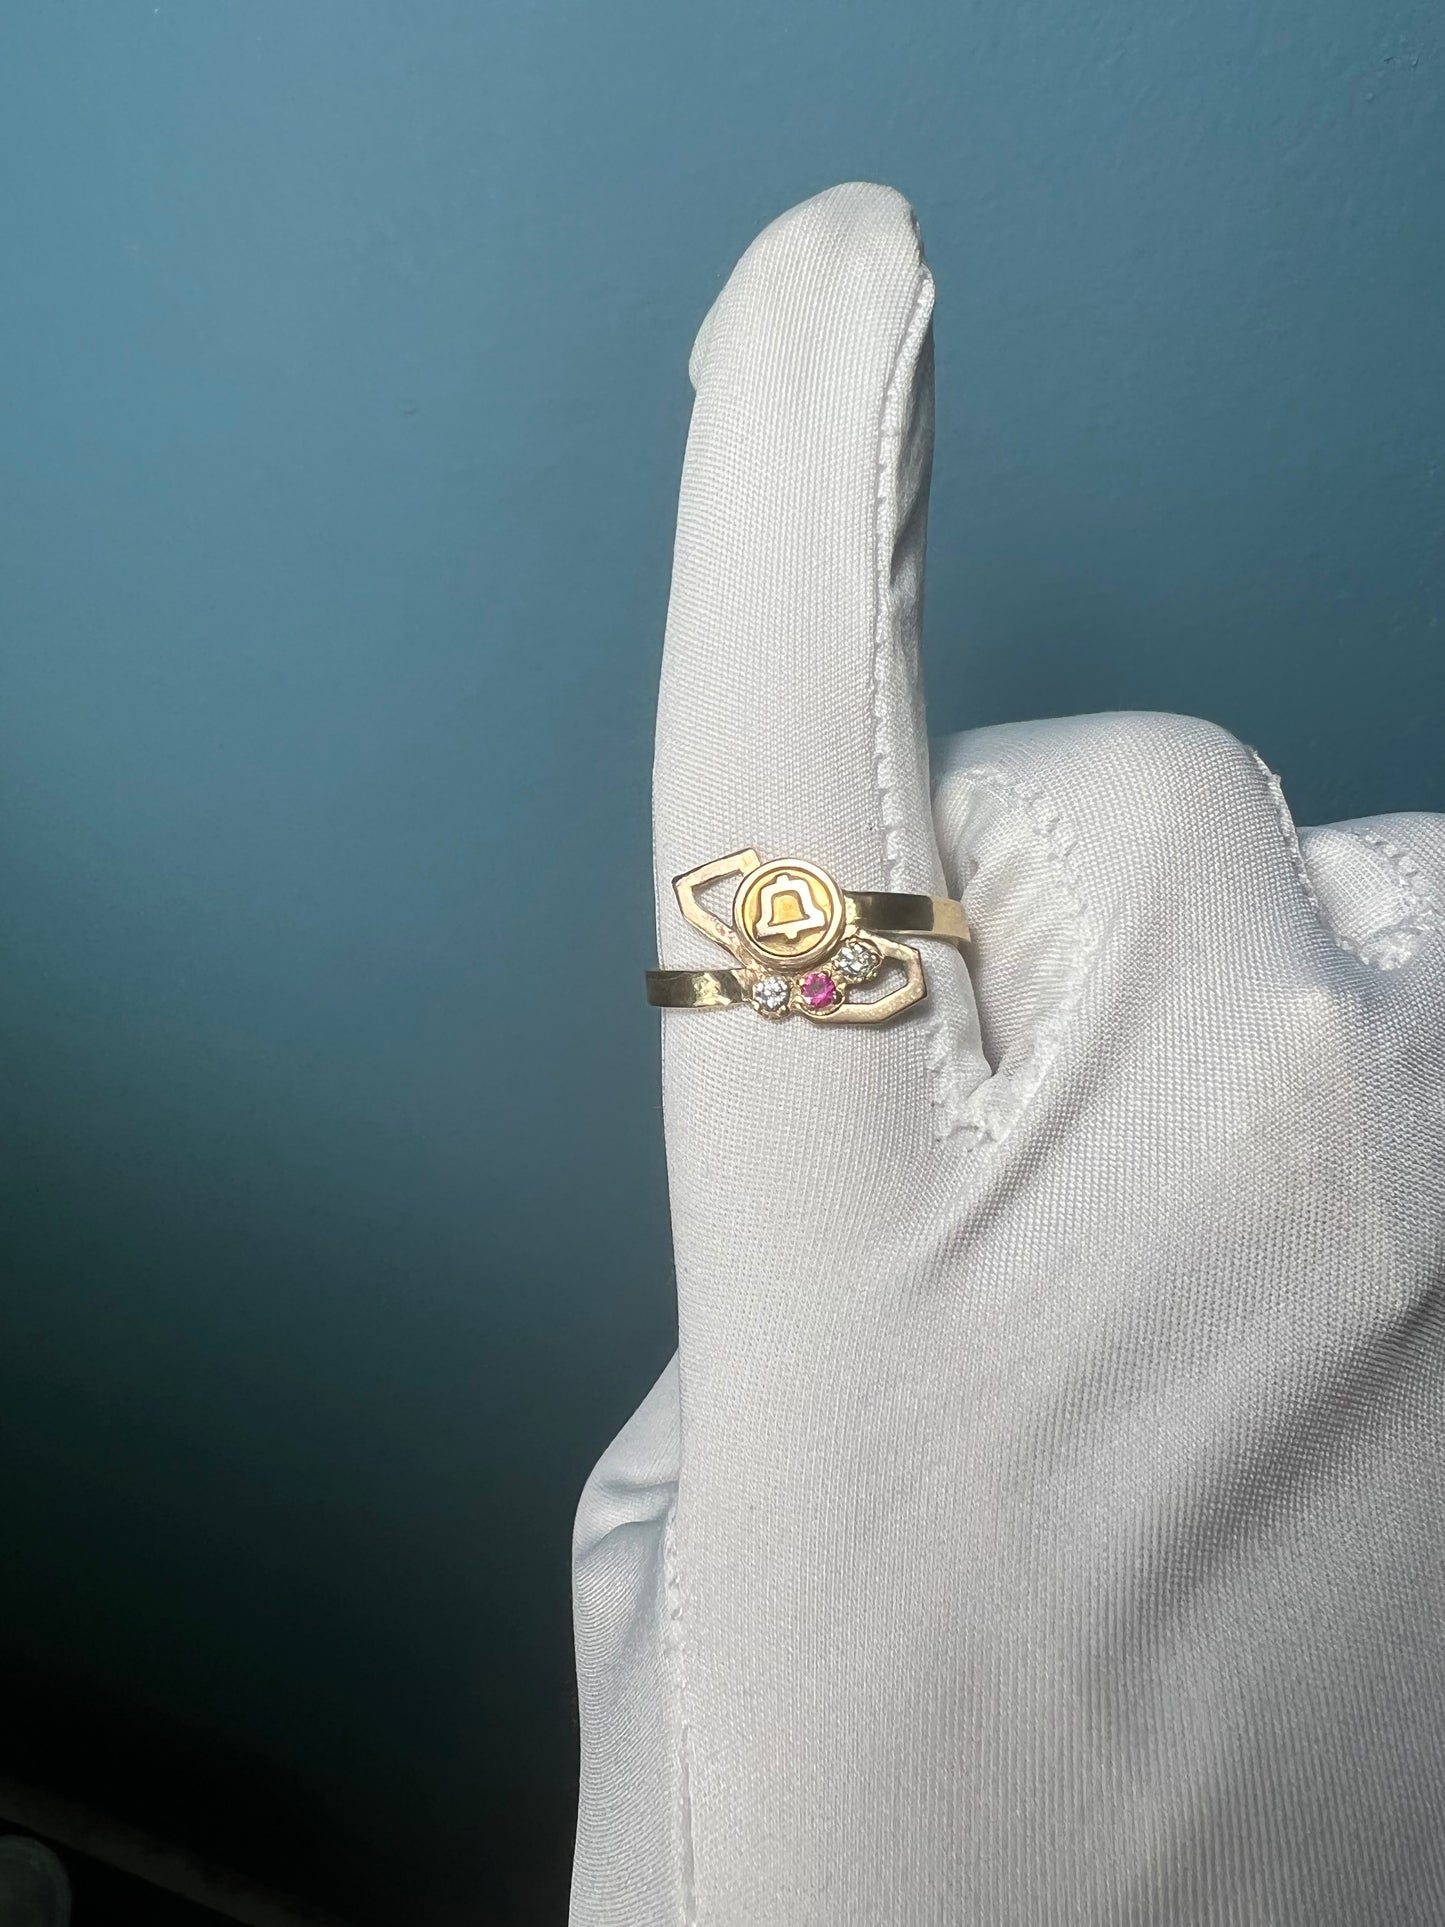 Californication Ring in 10k Yellow Gold By Maxwell The Jeweler